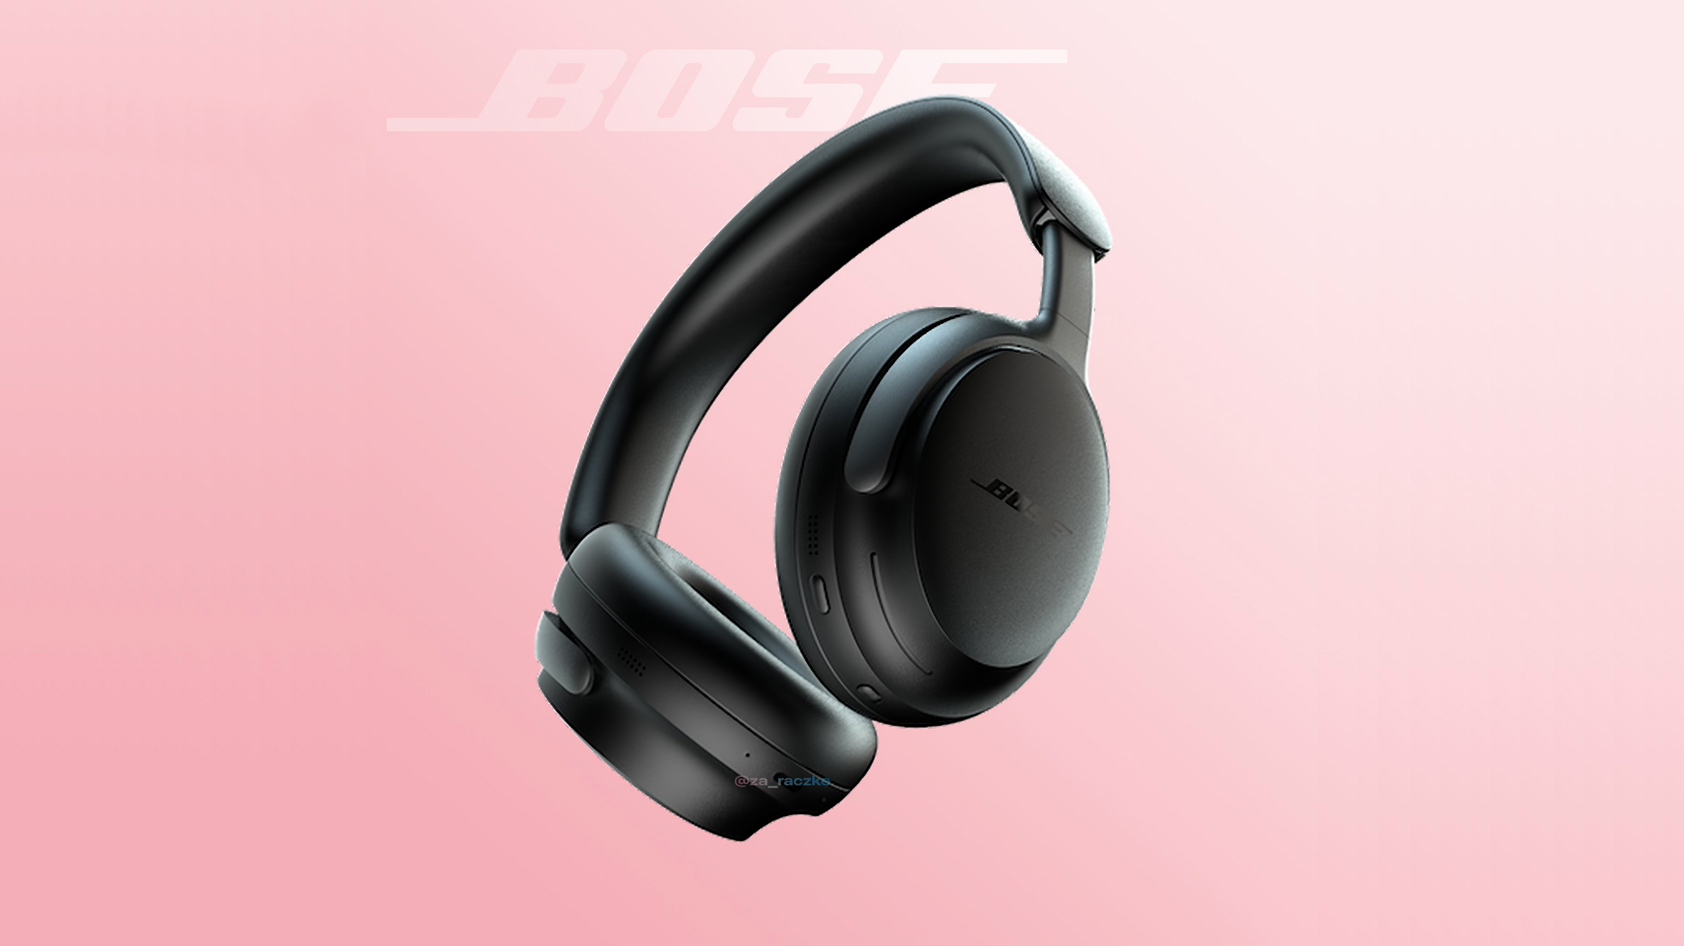 A render of the Bose QuietComfort Ultra headphones against a pink background.